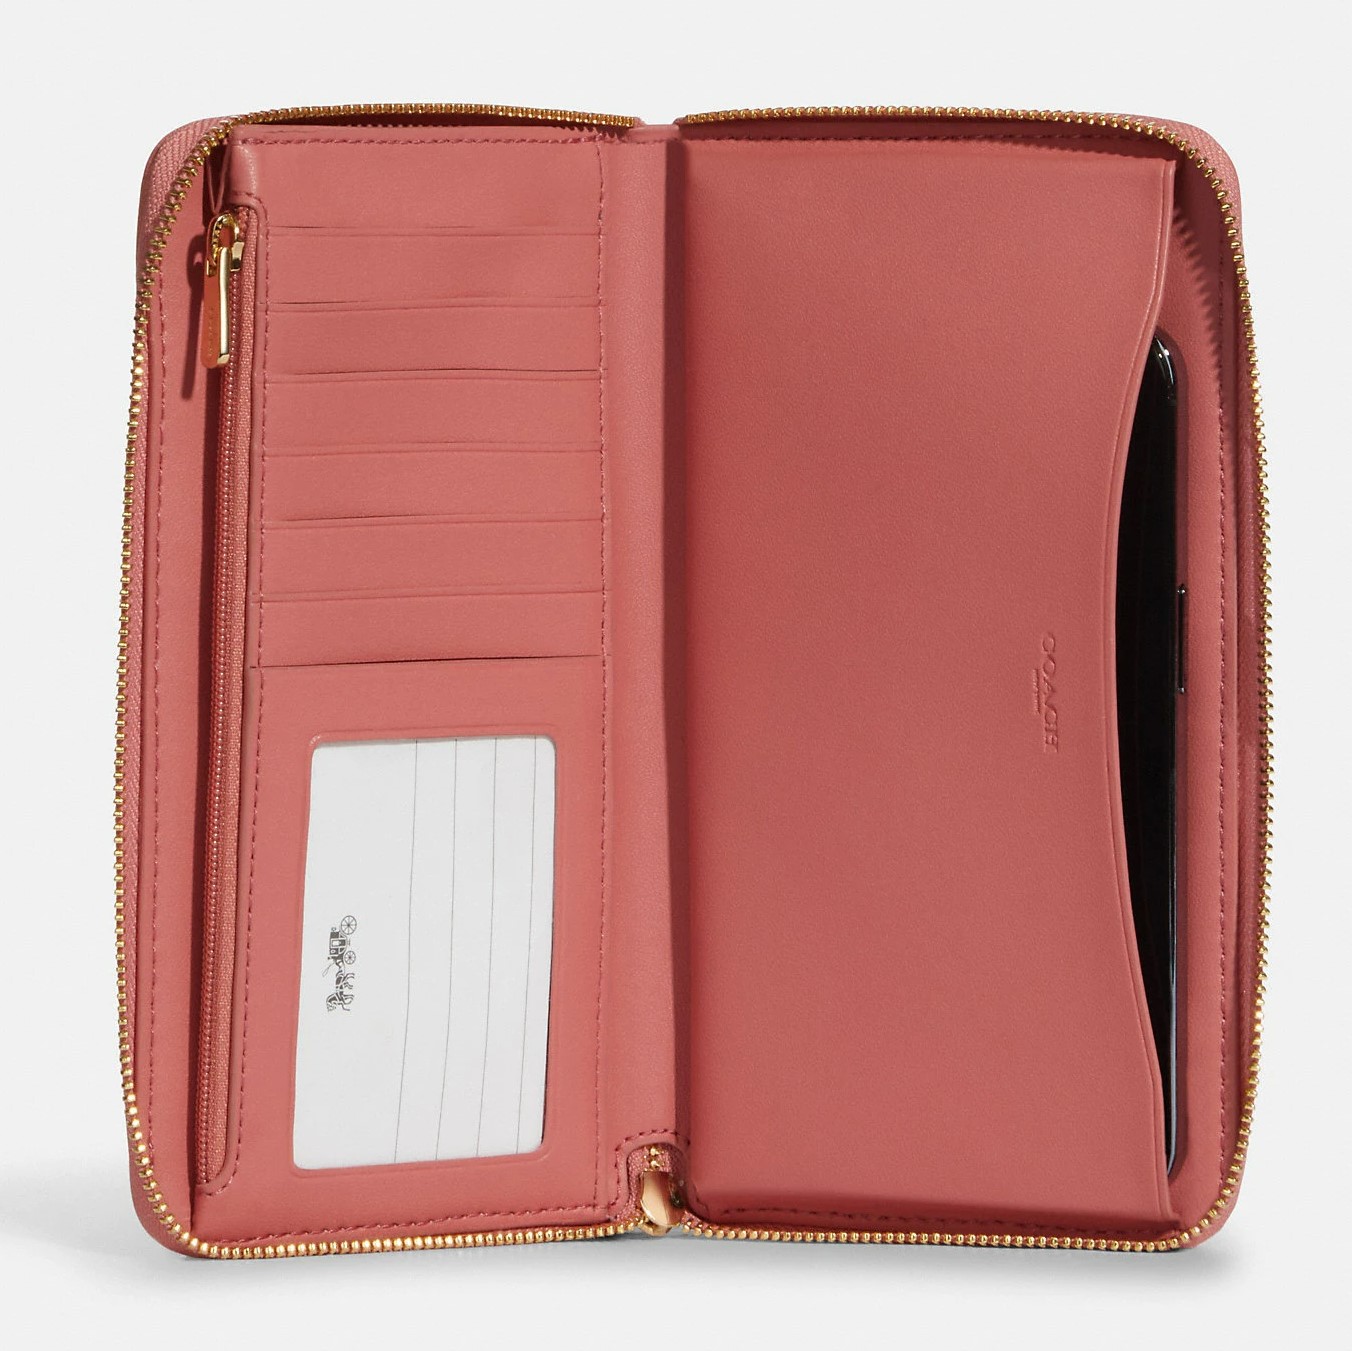 VÍ COACH DEMPSEY LARGE PHONE WALLET IN SIGNATURE JACQUARD WITH STRIPE AND COACH PATCH 7